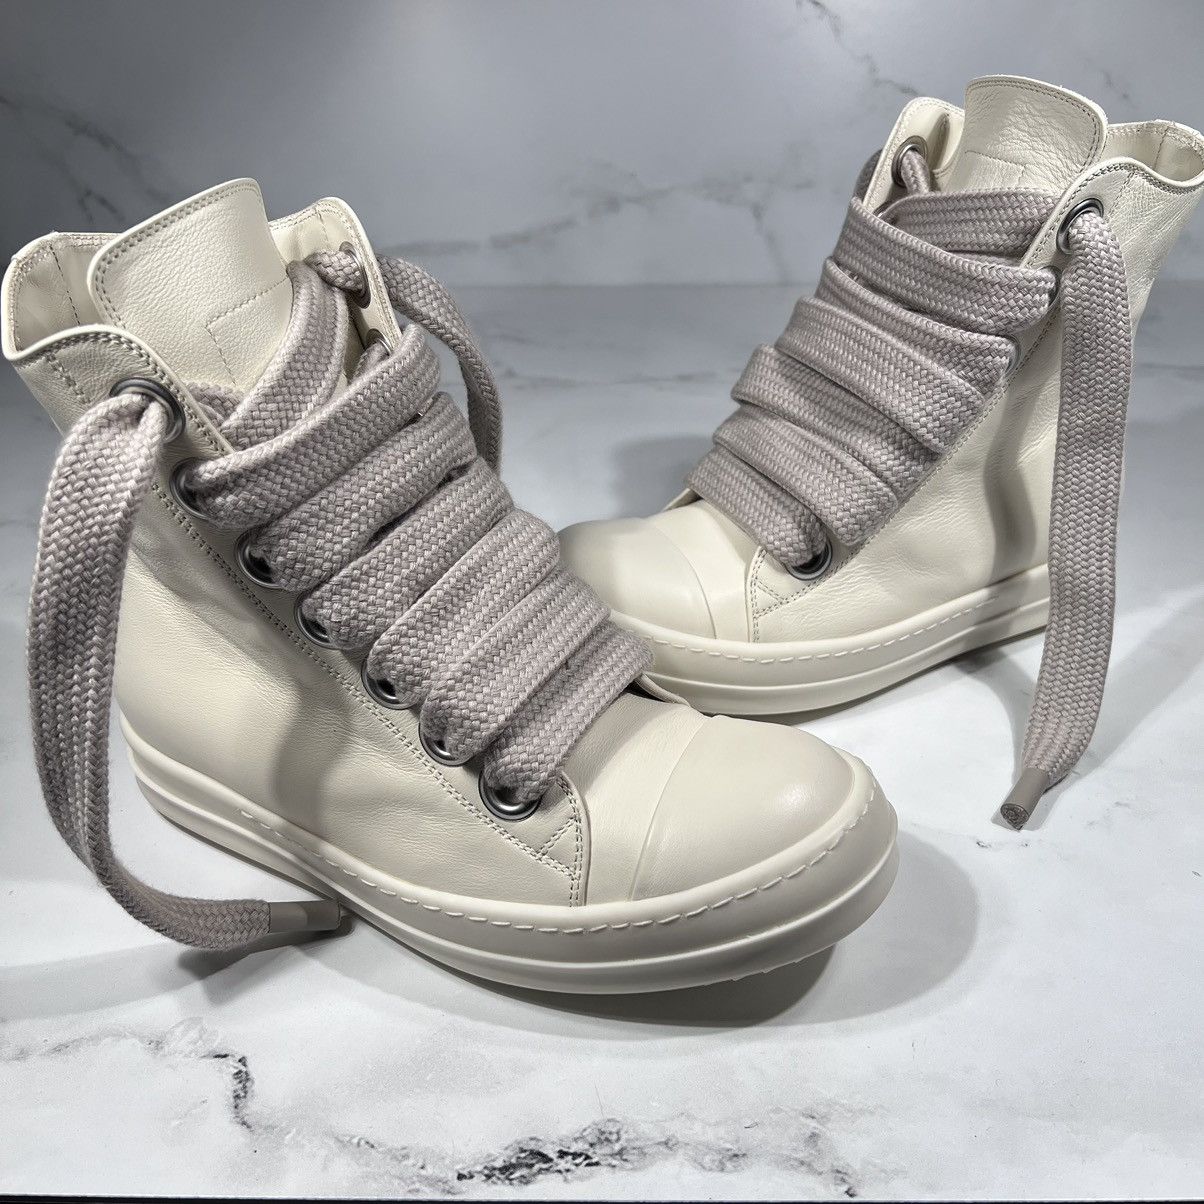 Rick Owens Rick Owens Ramones Milk Leather Thick Lace High Top Sneakers Size US 7 / IT 37 - 6 Thumbnail